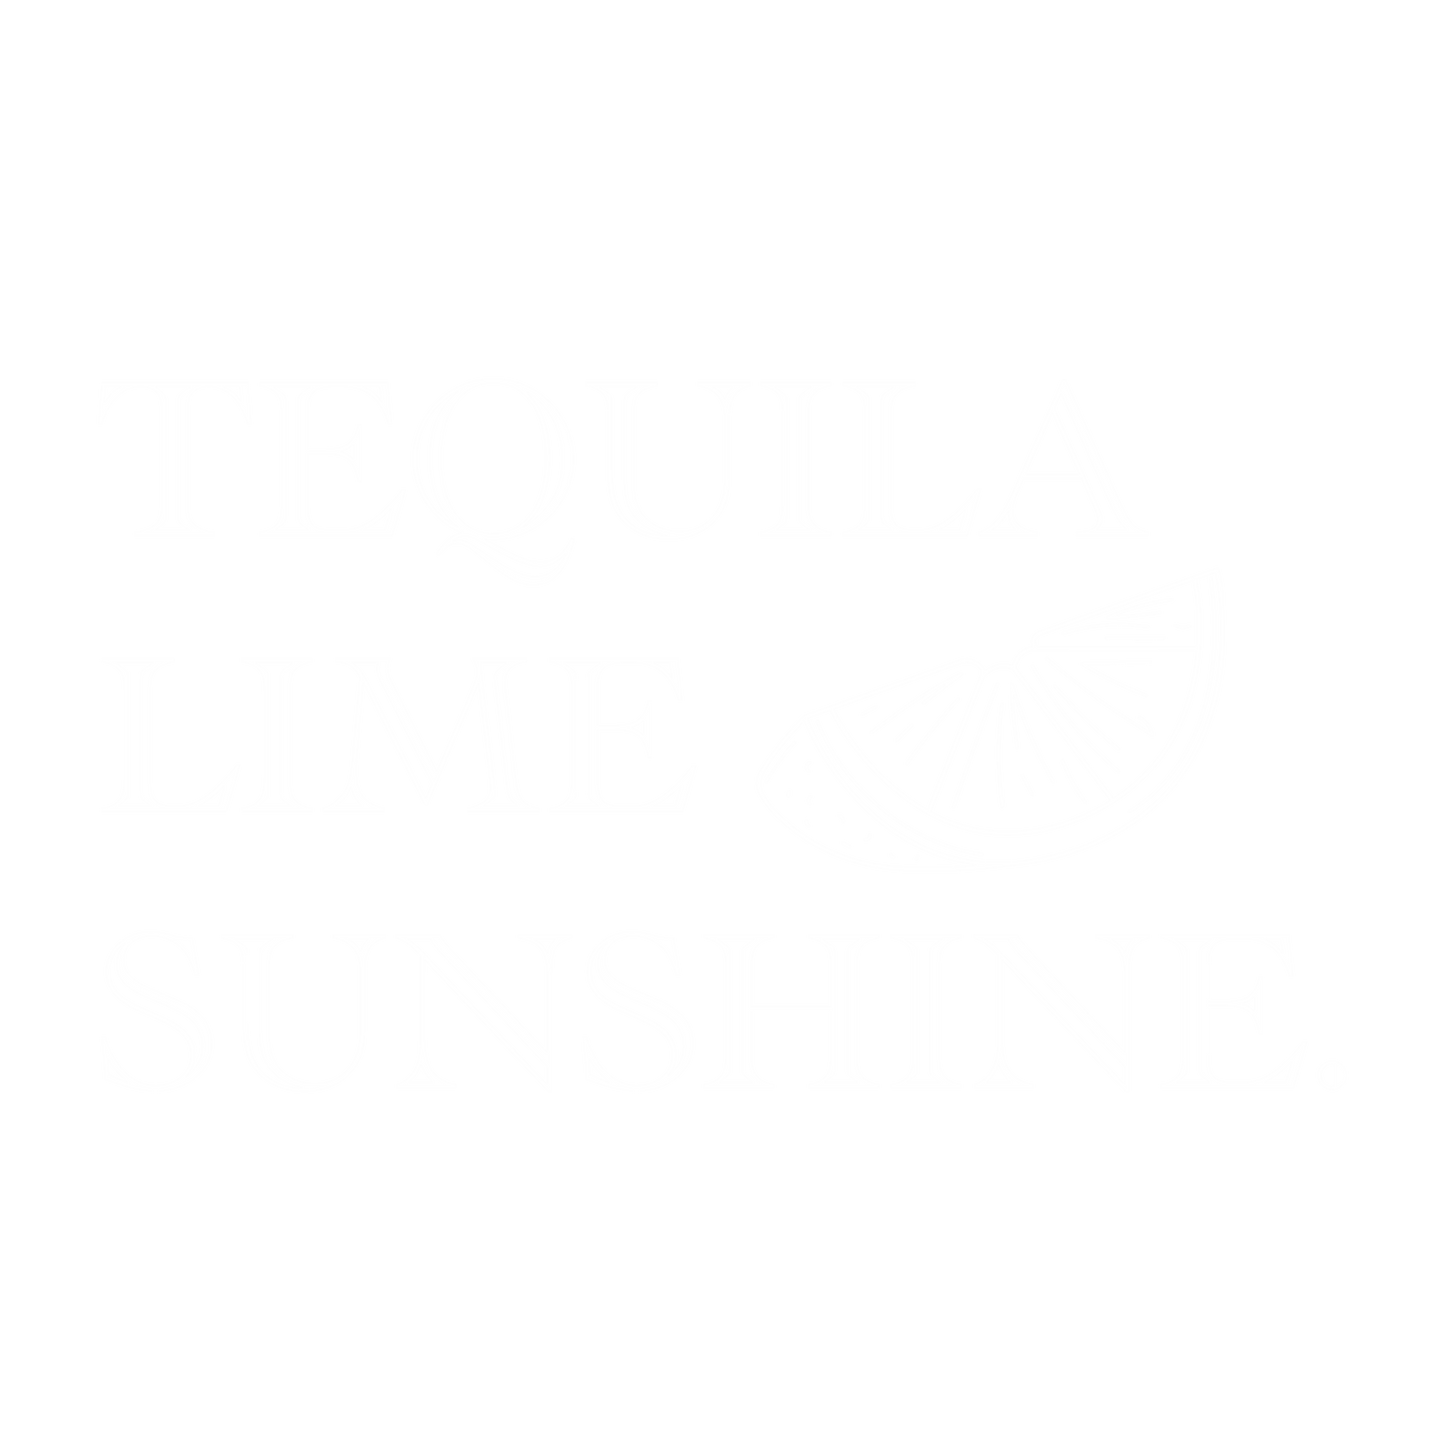 Tequila Lime Sunshine. New